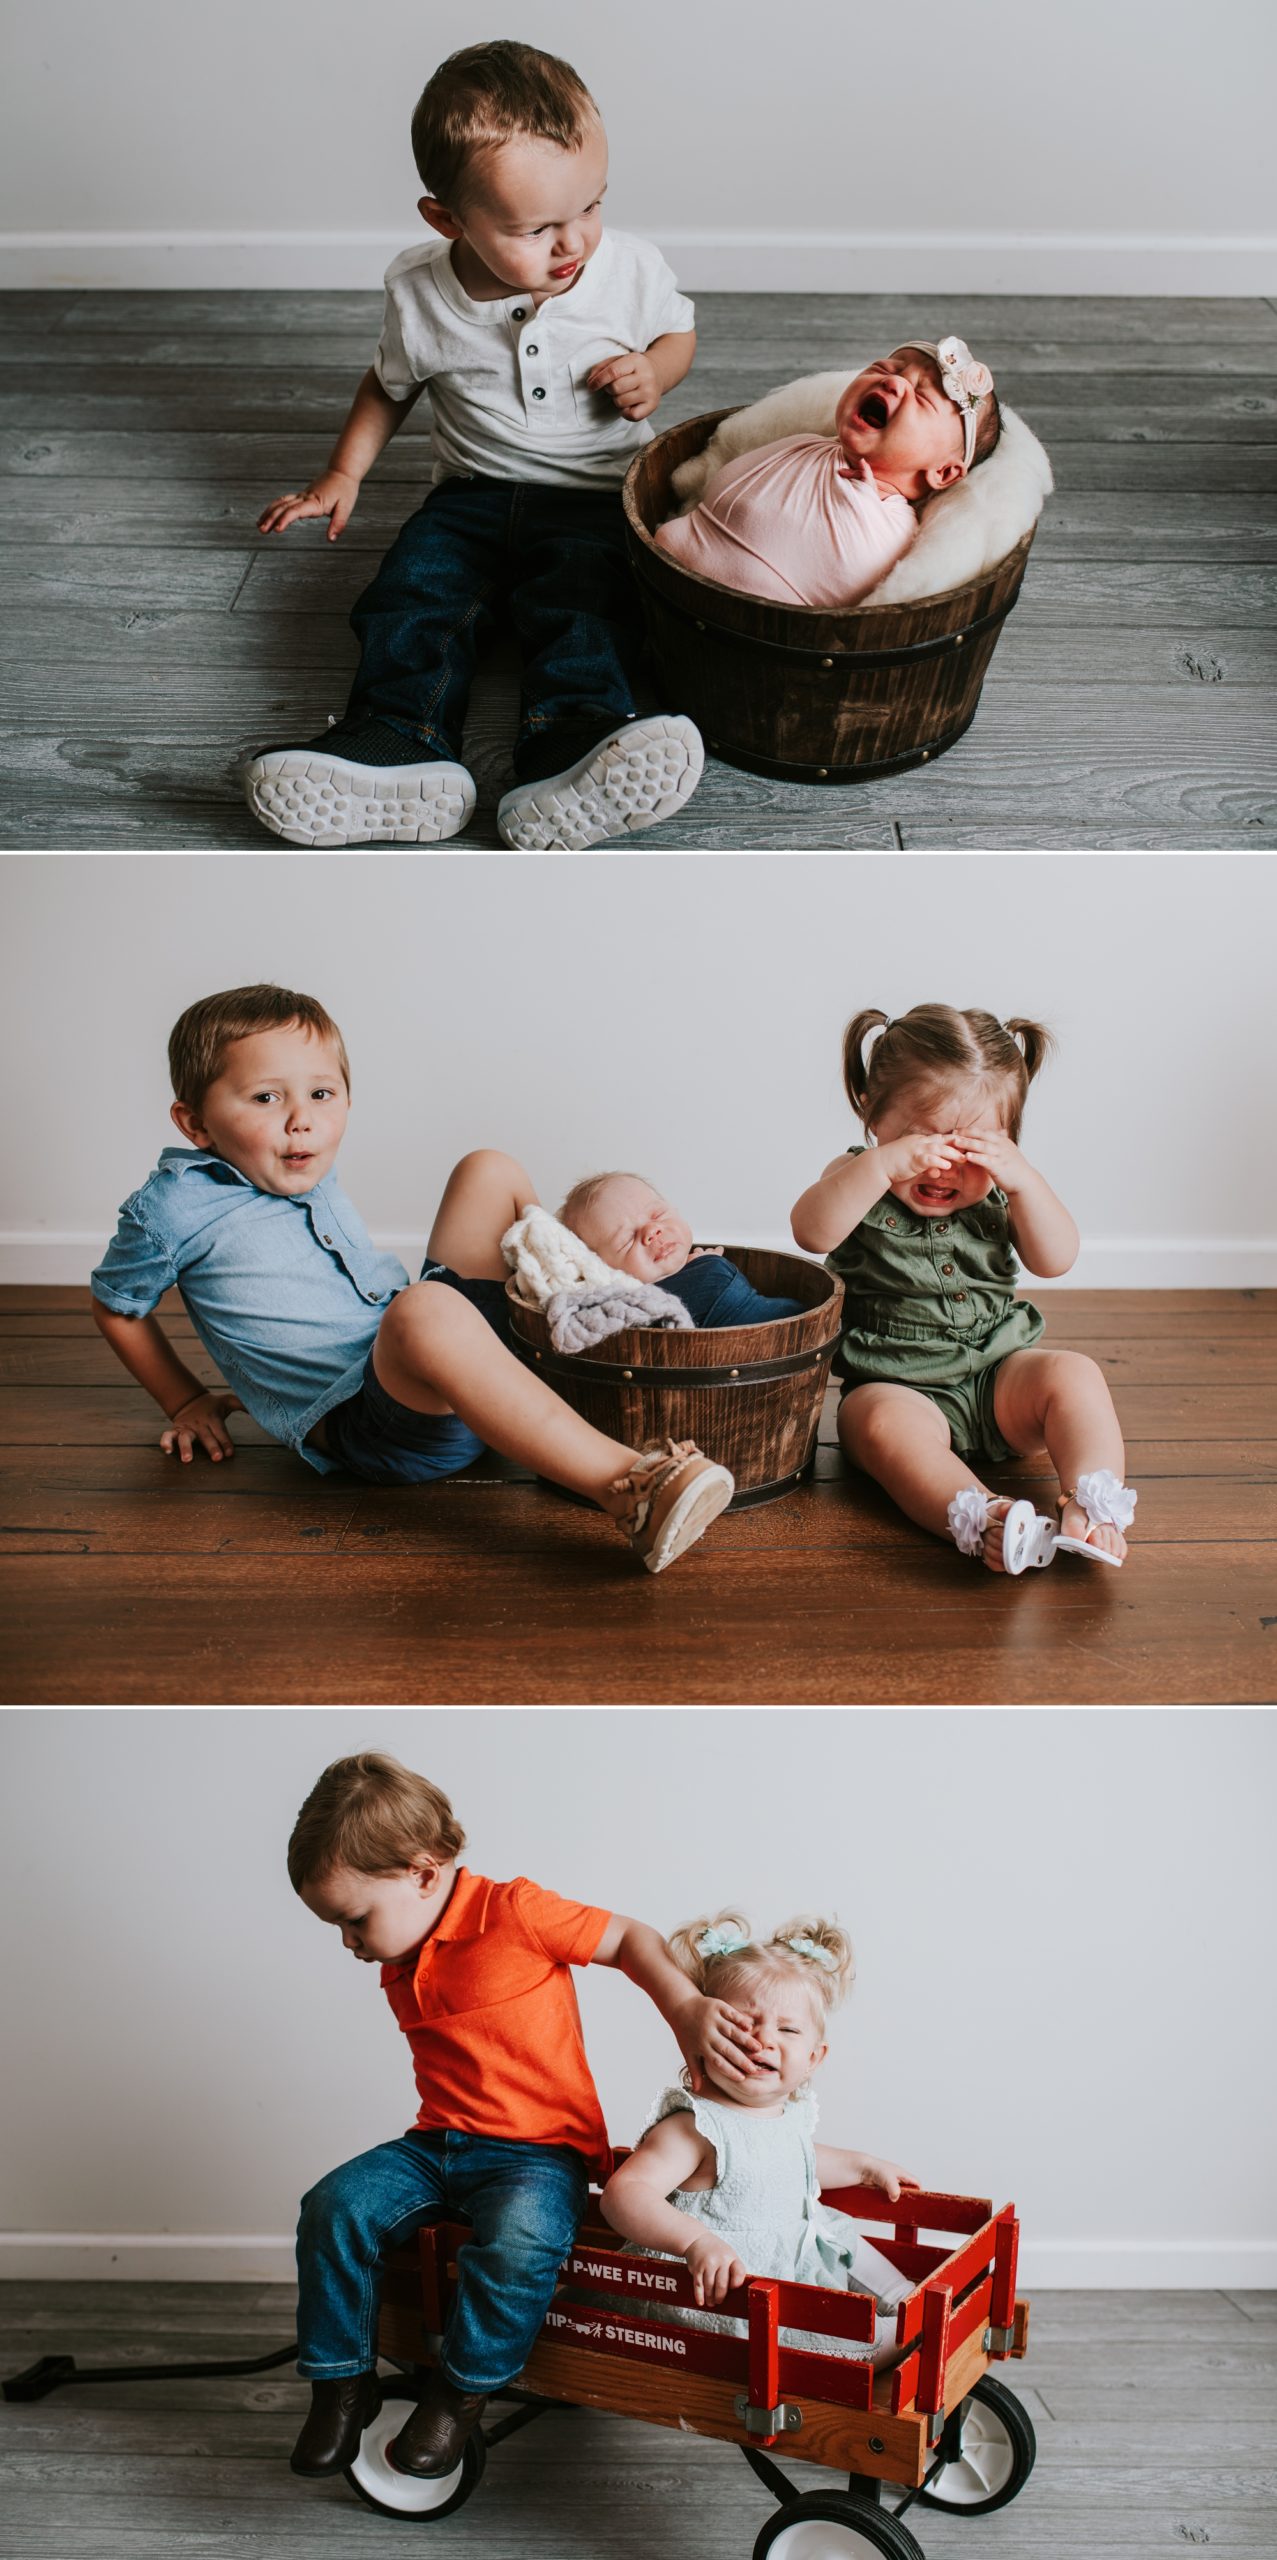 Silly images of siblings making each other cry at a photo session.  Bloopers and outtakes.  Baby Photographer 63090